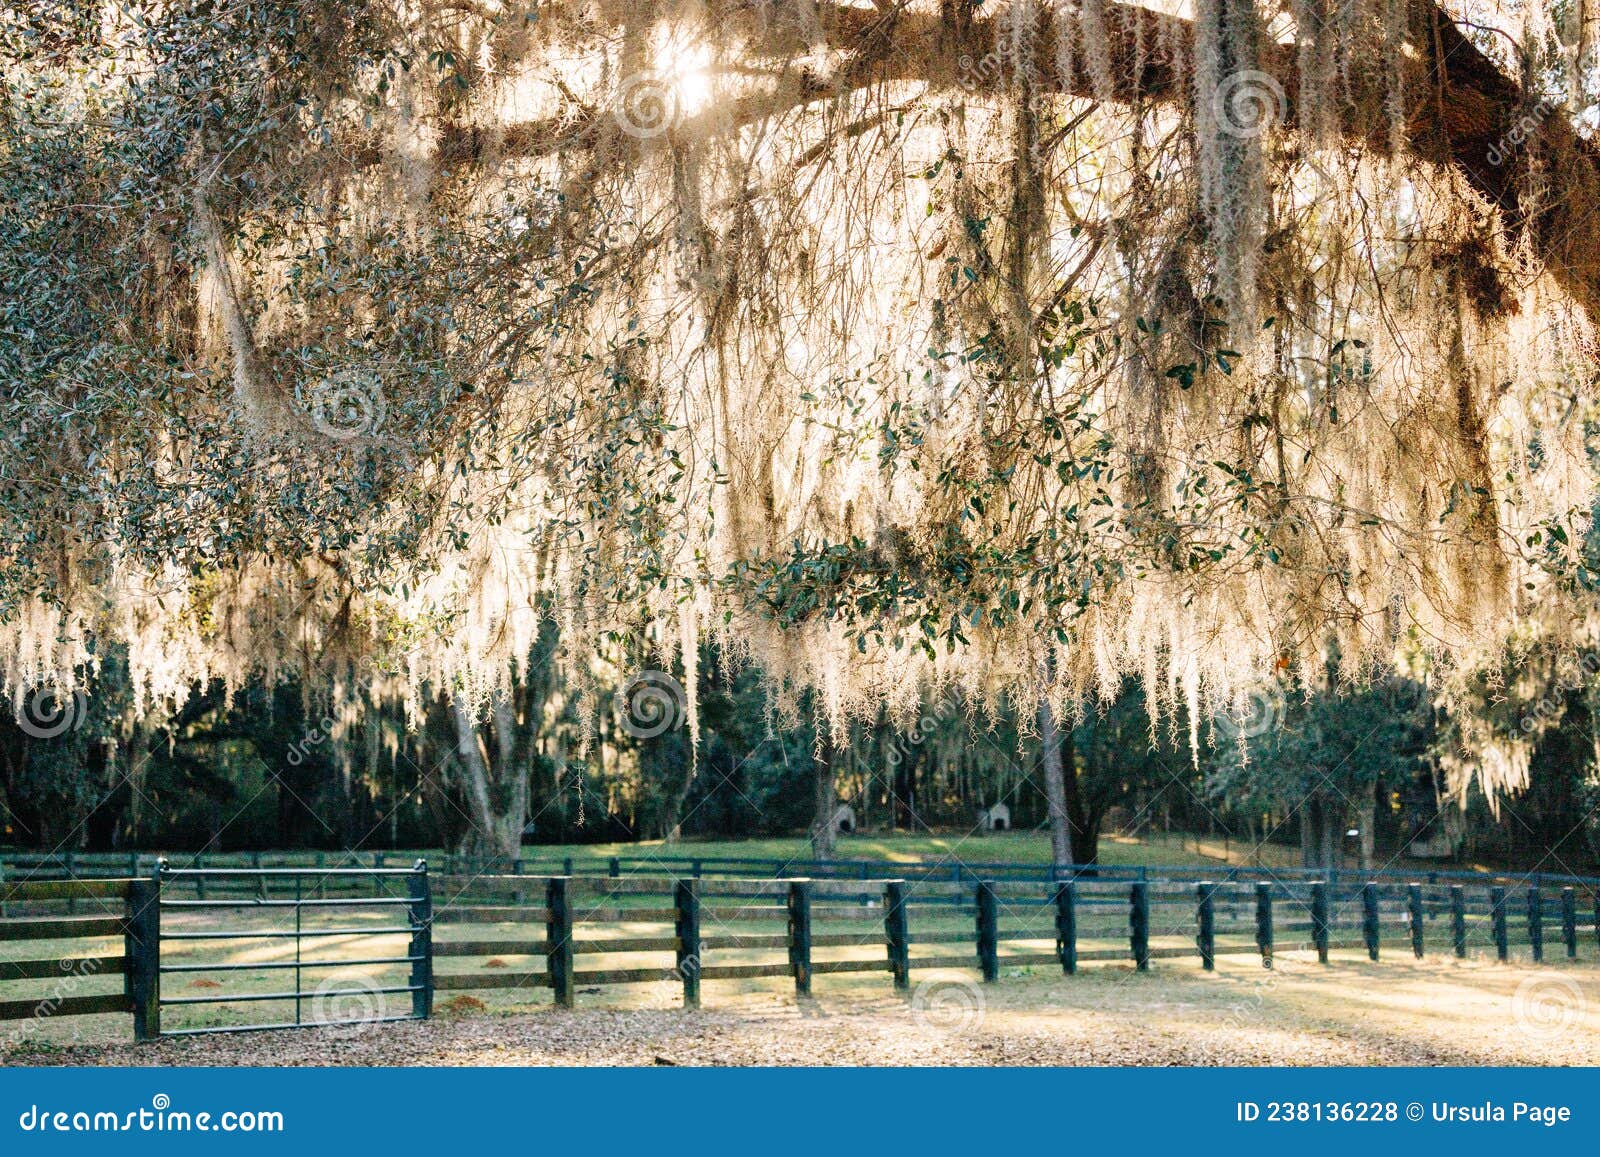 A Southern Georgia Outdoor Fence with the Sun Streaming through the Old Oak Tree with Hanging Spanish Moss As a Travel Stock Photo